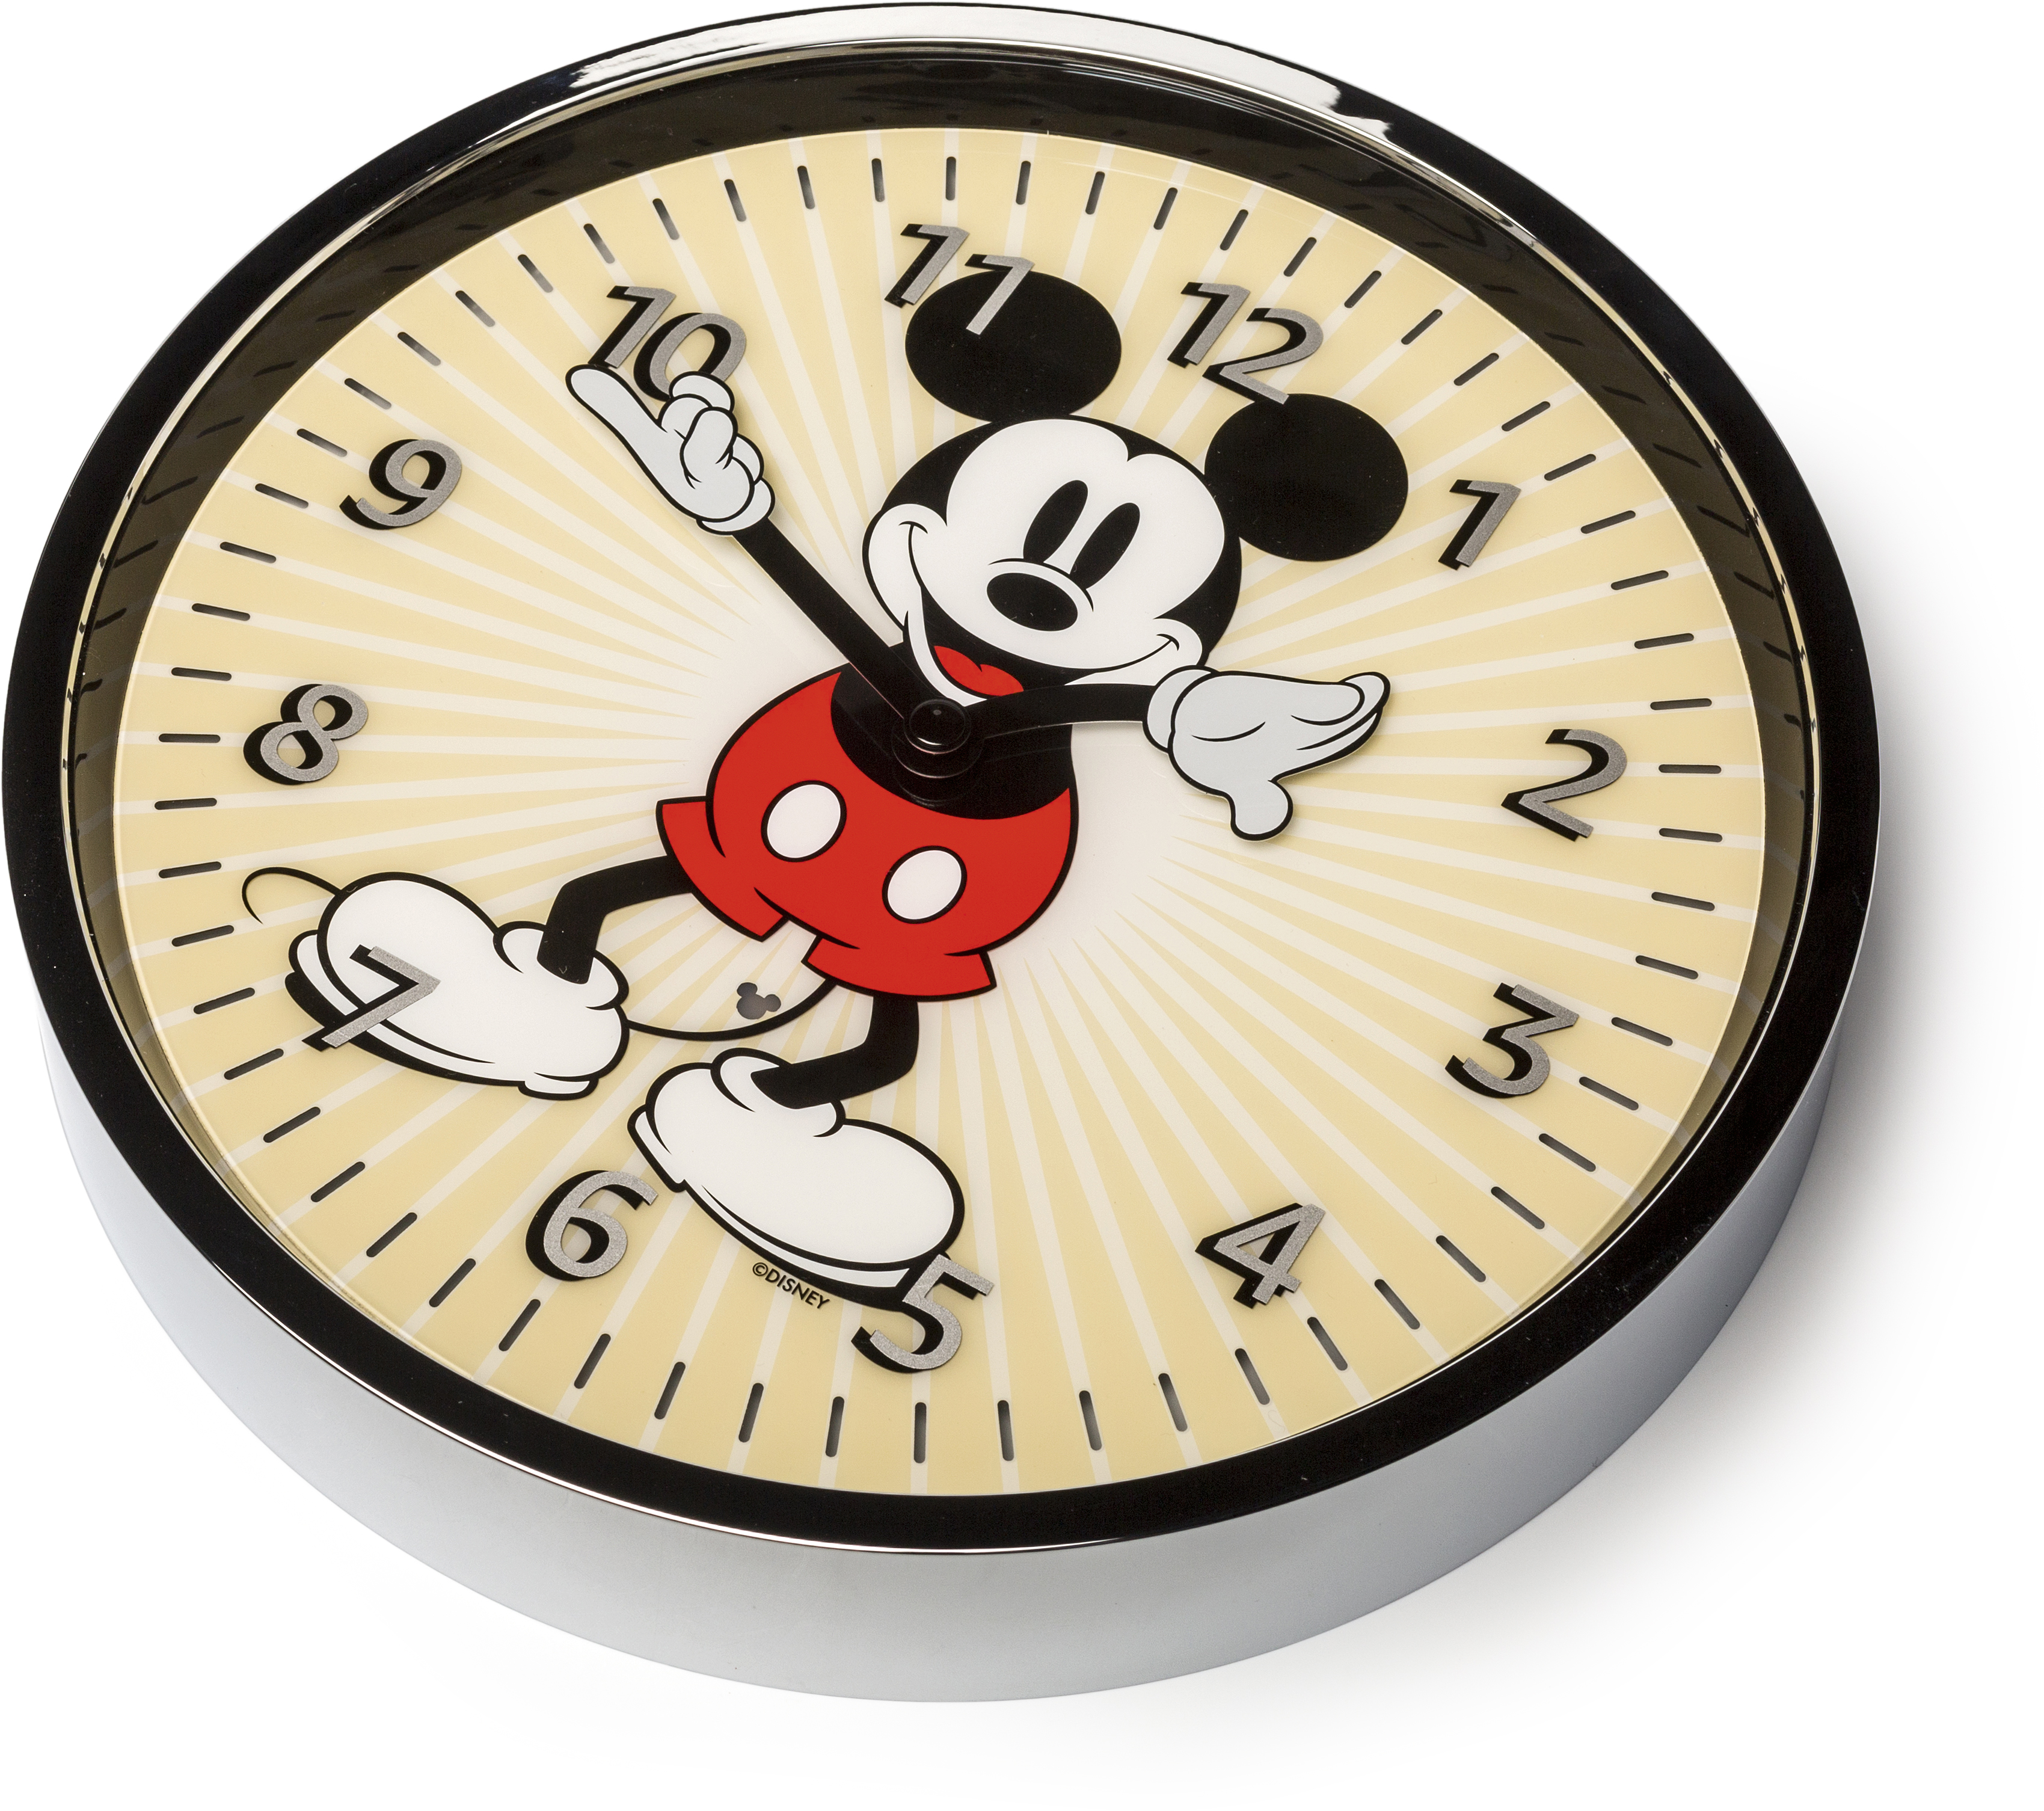 Echo Wall Clock Micky-Maus-Edition | heise online